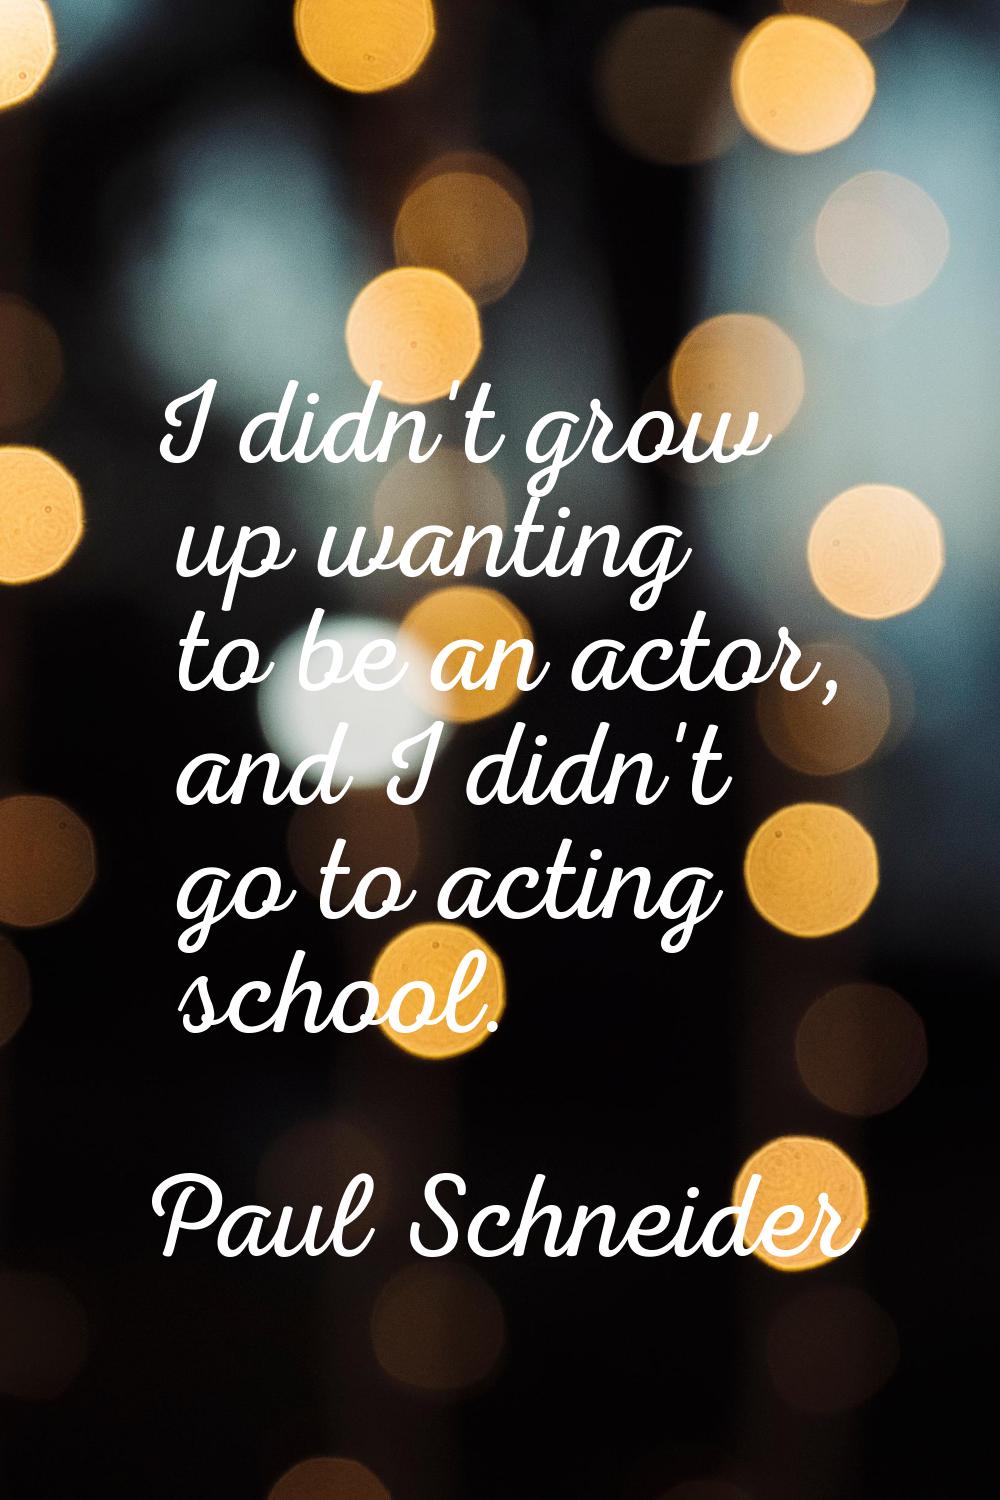 I didn't grow up wanting to be an actor, and I didn't go to acting school.